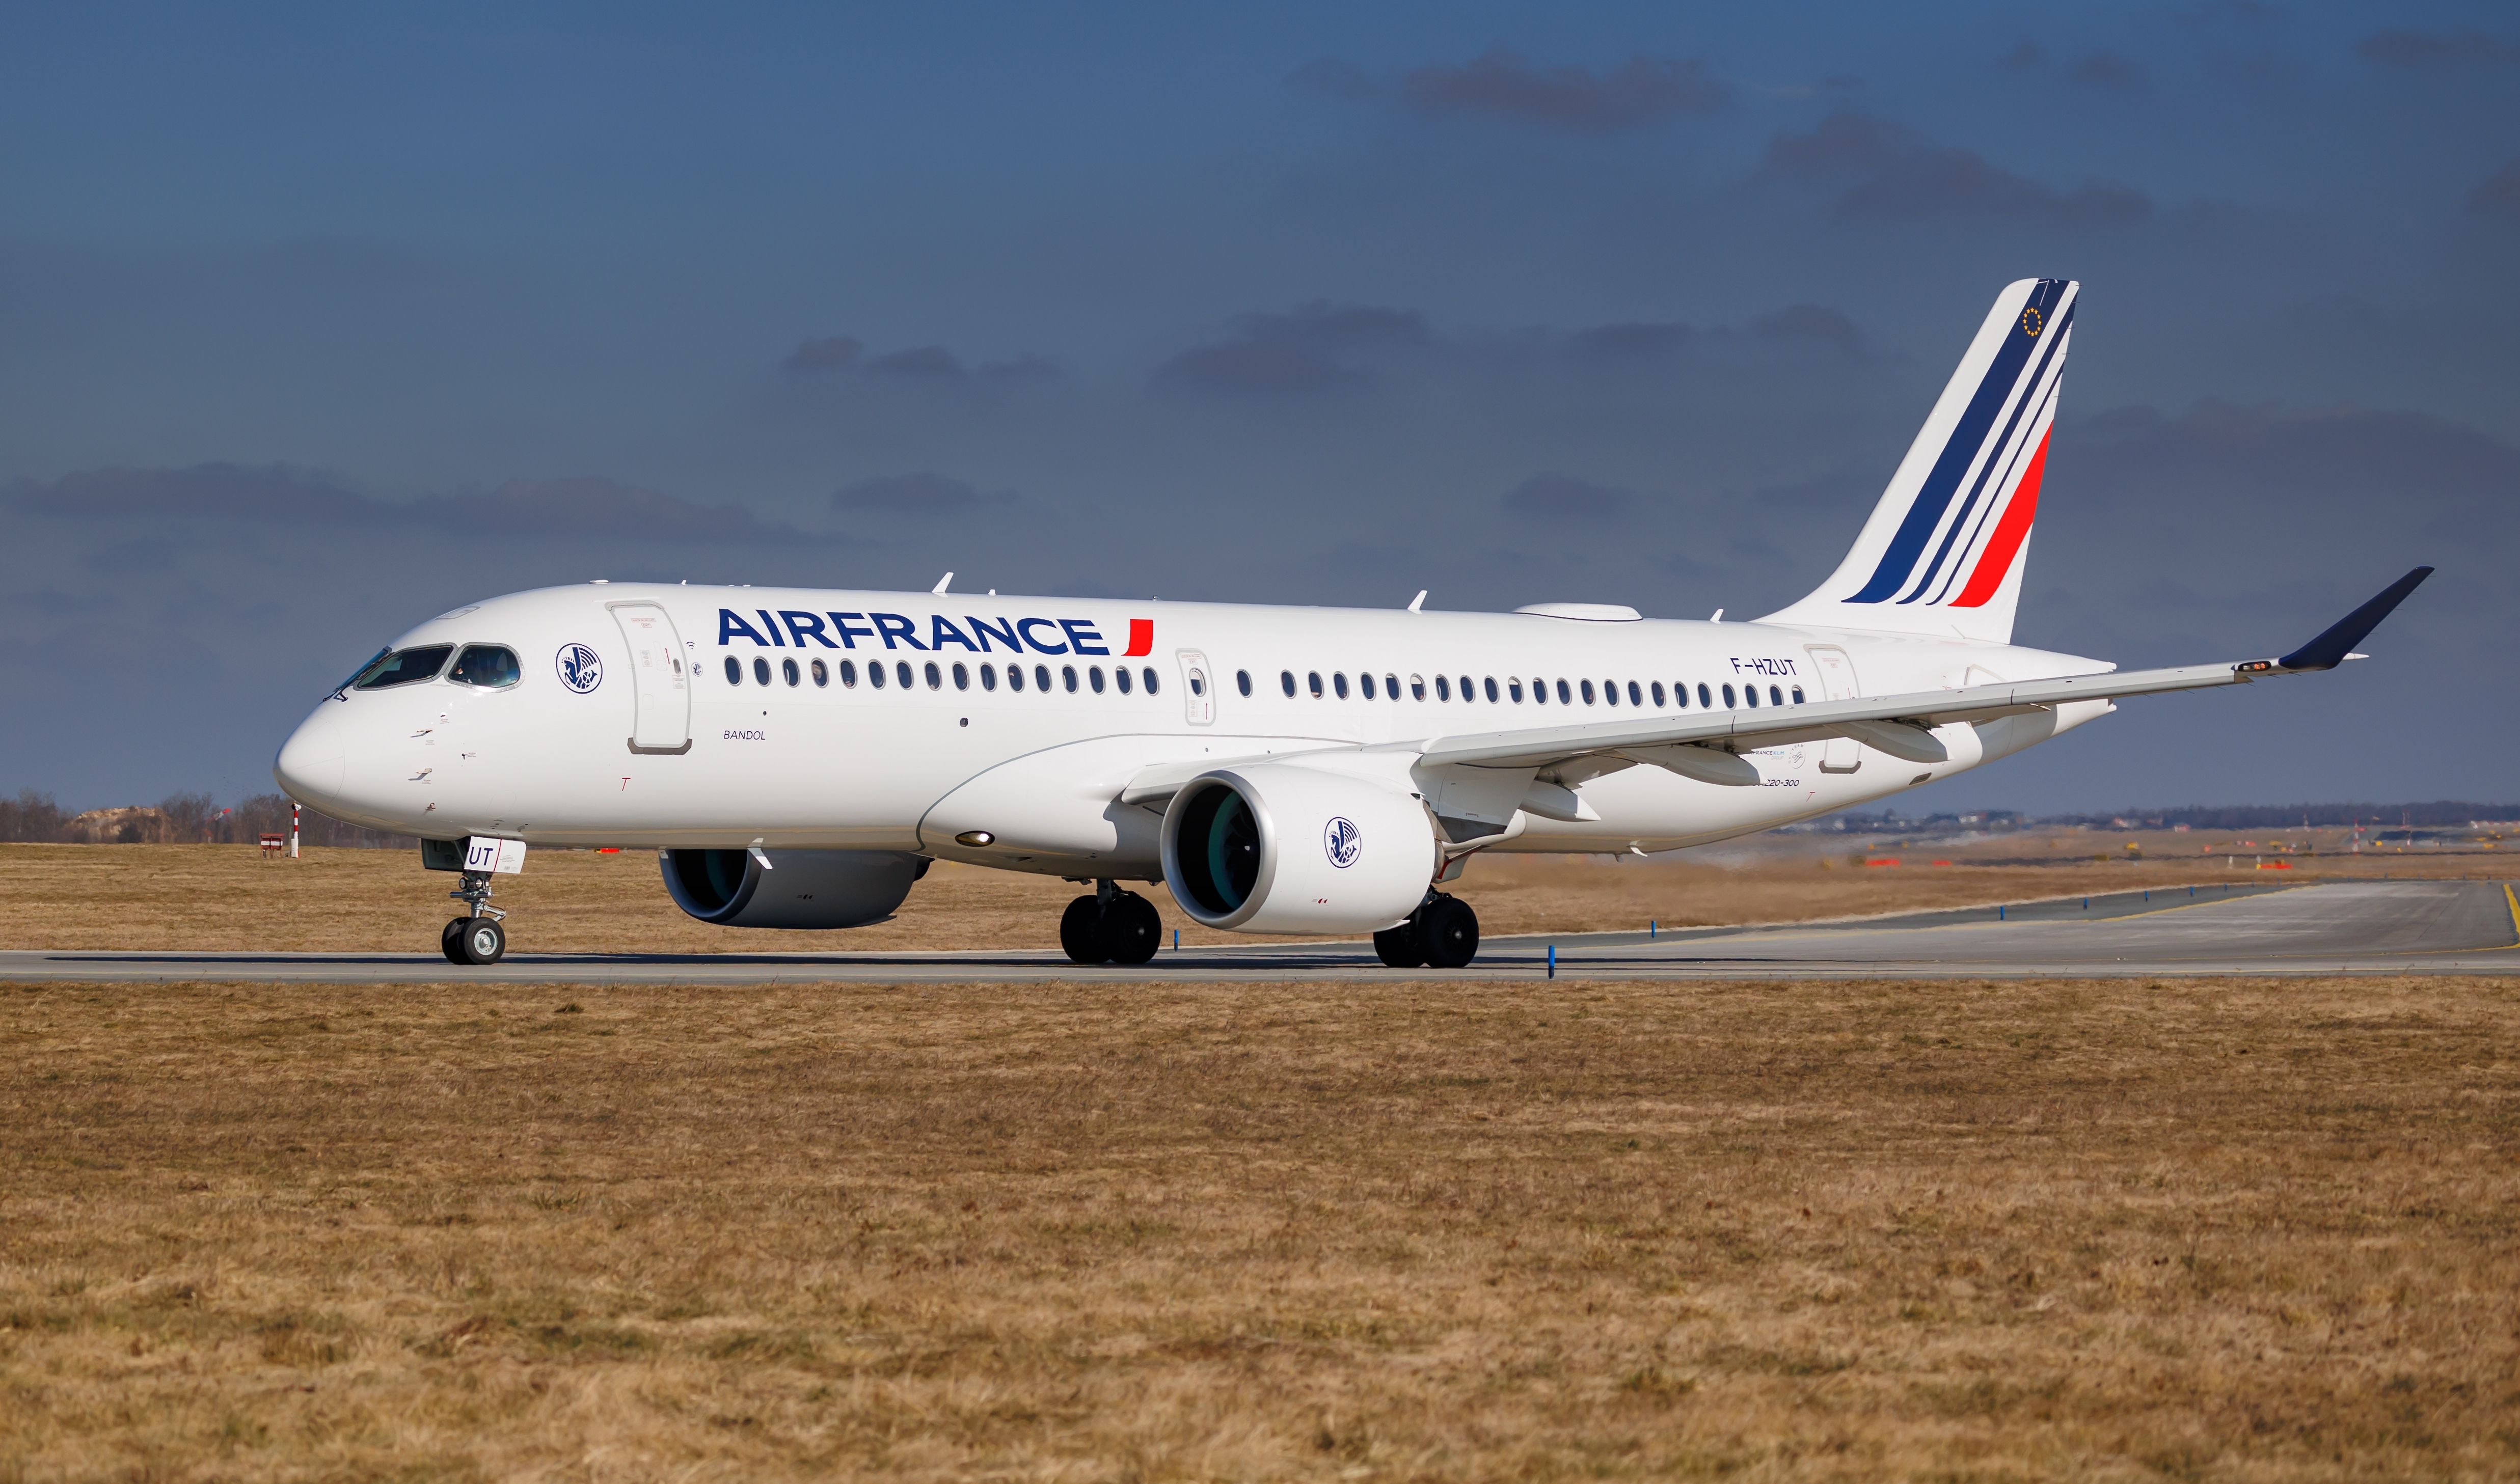 Air France Airbus A220 on the apron